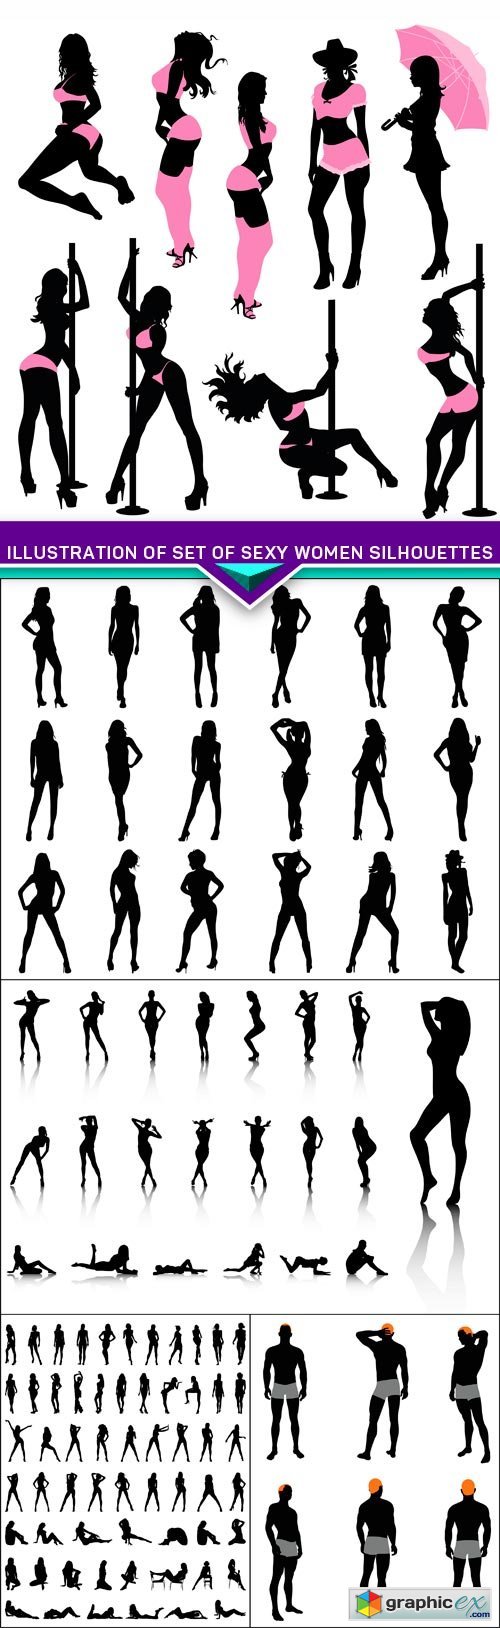 Illustration Of Set Of Sexy Women Silhouettes 5X EPS Free Download